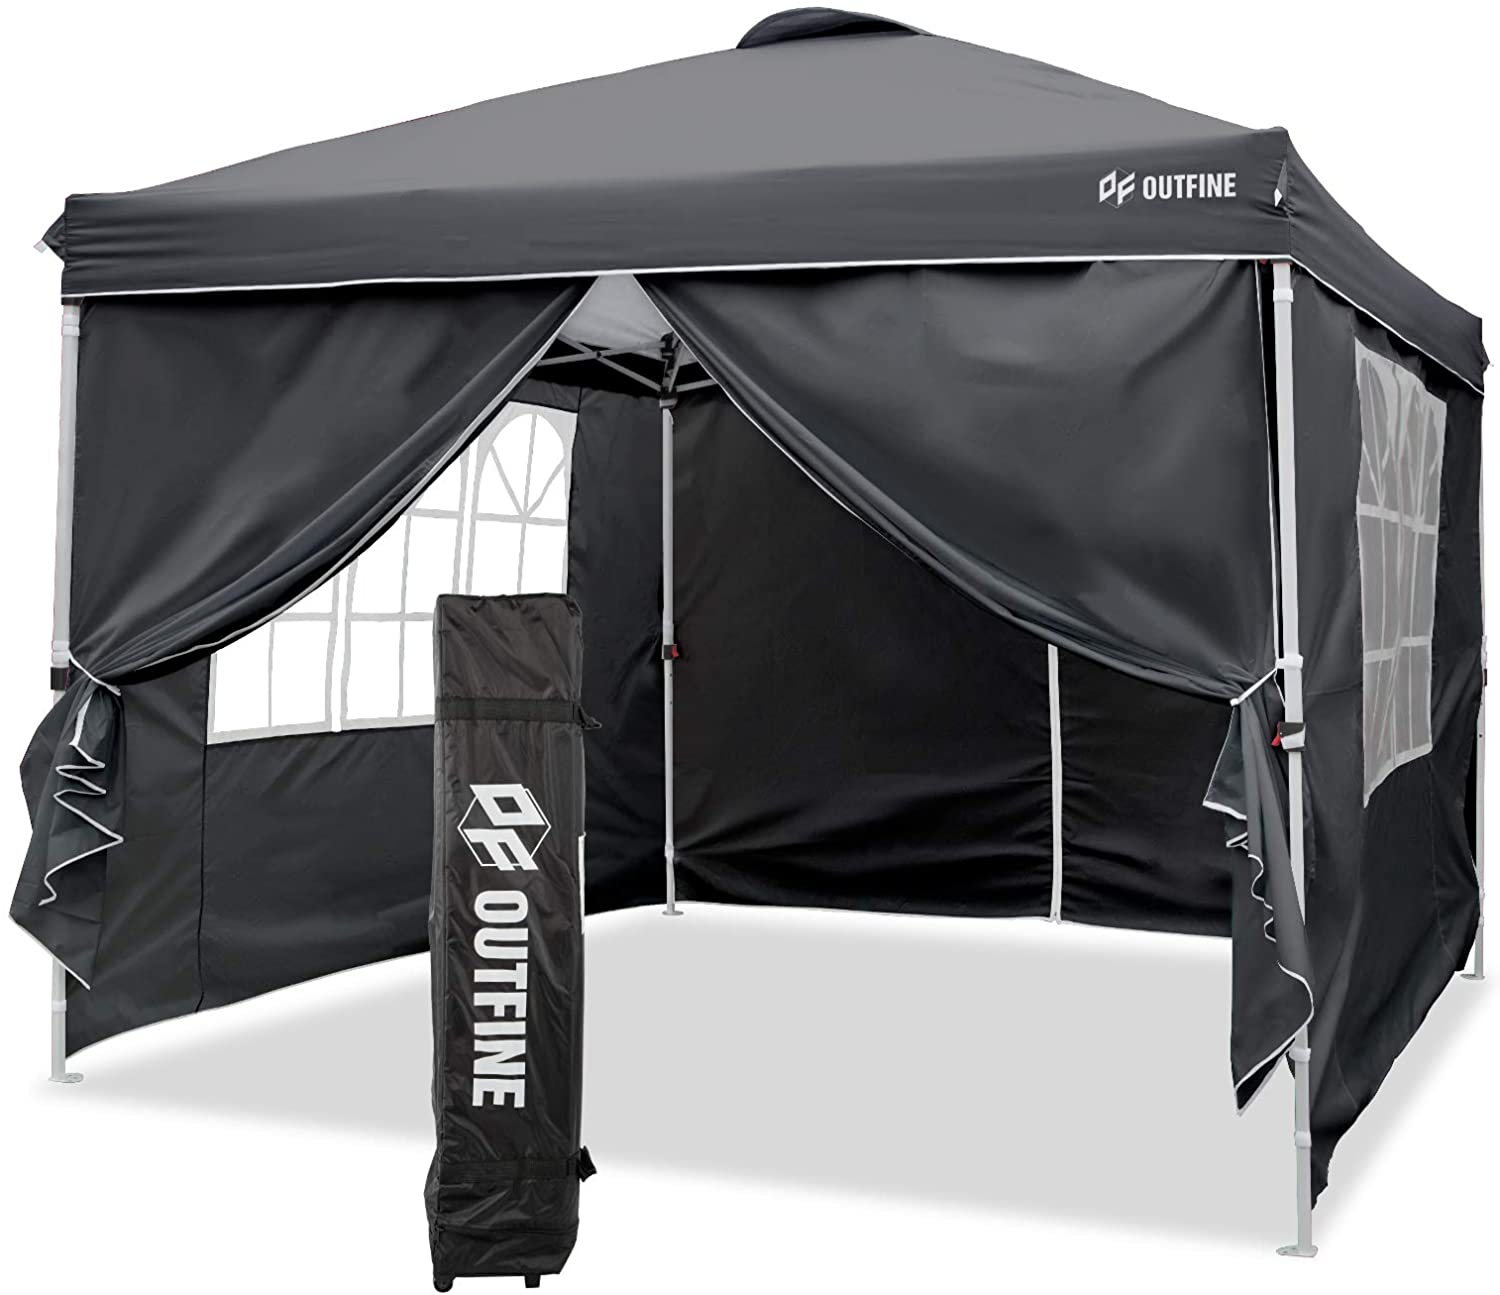 OUTFINE Canopy Pop Up Commercial Instant Gazebo